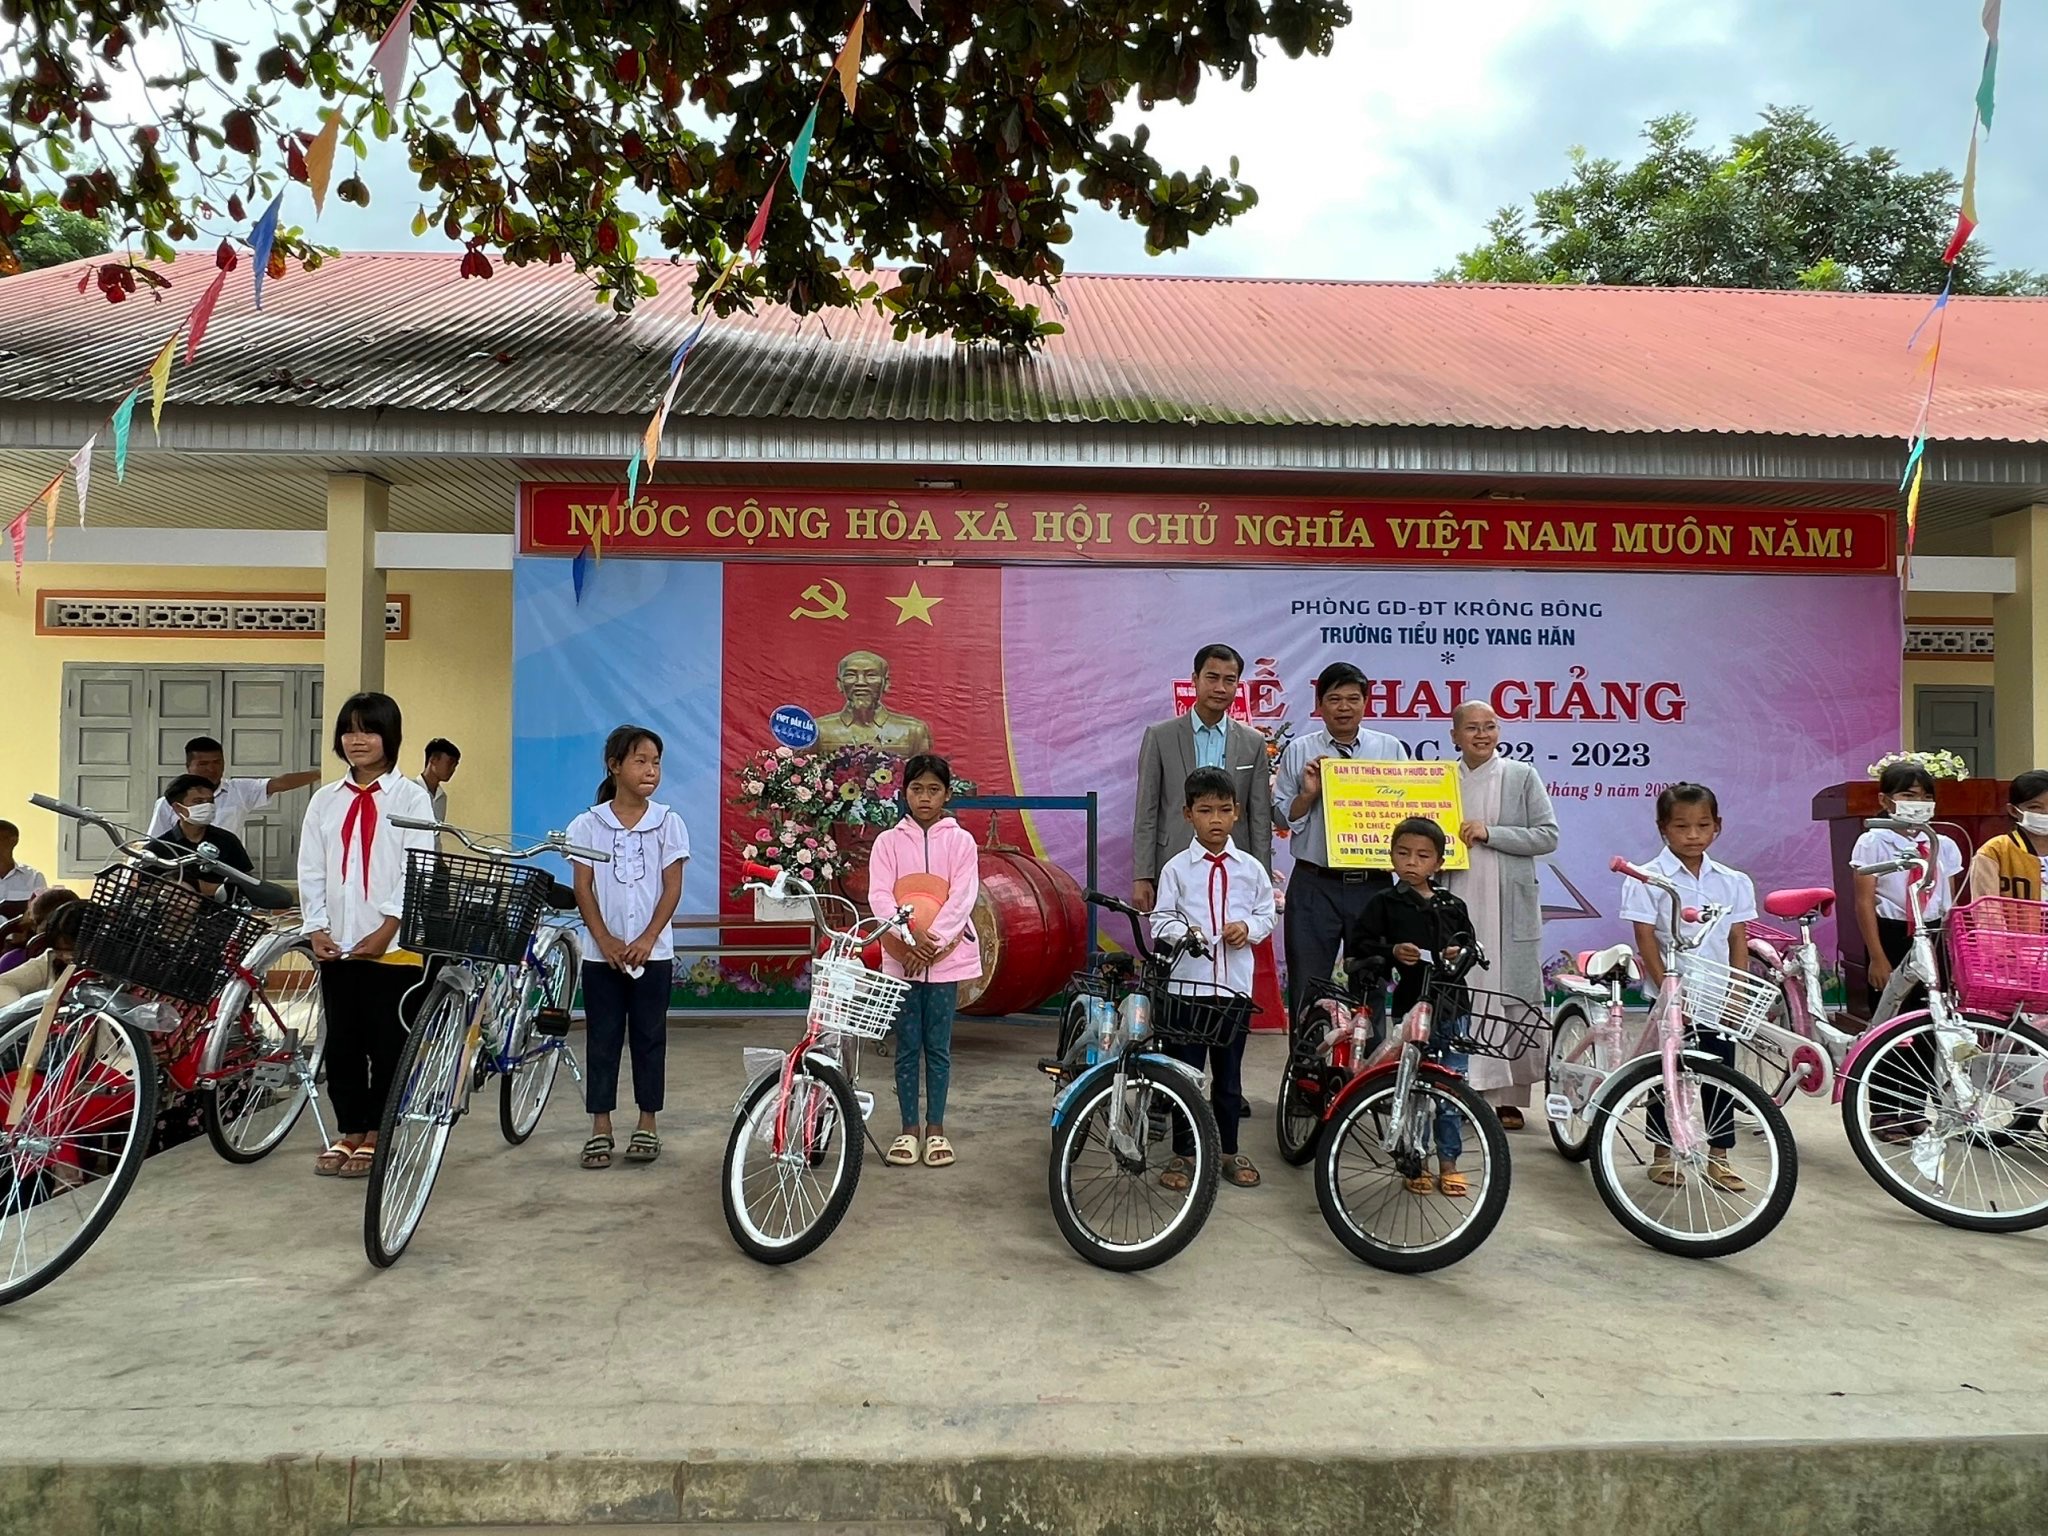 Sponsors present underprivileged students with bicycles during the school opening ceremony at Yang Han Elementary School in Dak Lak Province, Vietnam, September 5, 2022. Photo: Tam An / Tuoi Tre